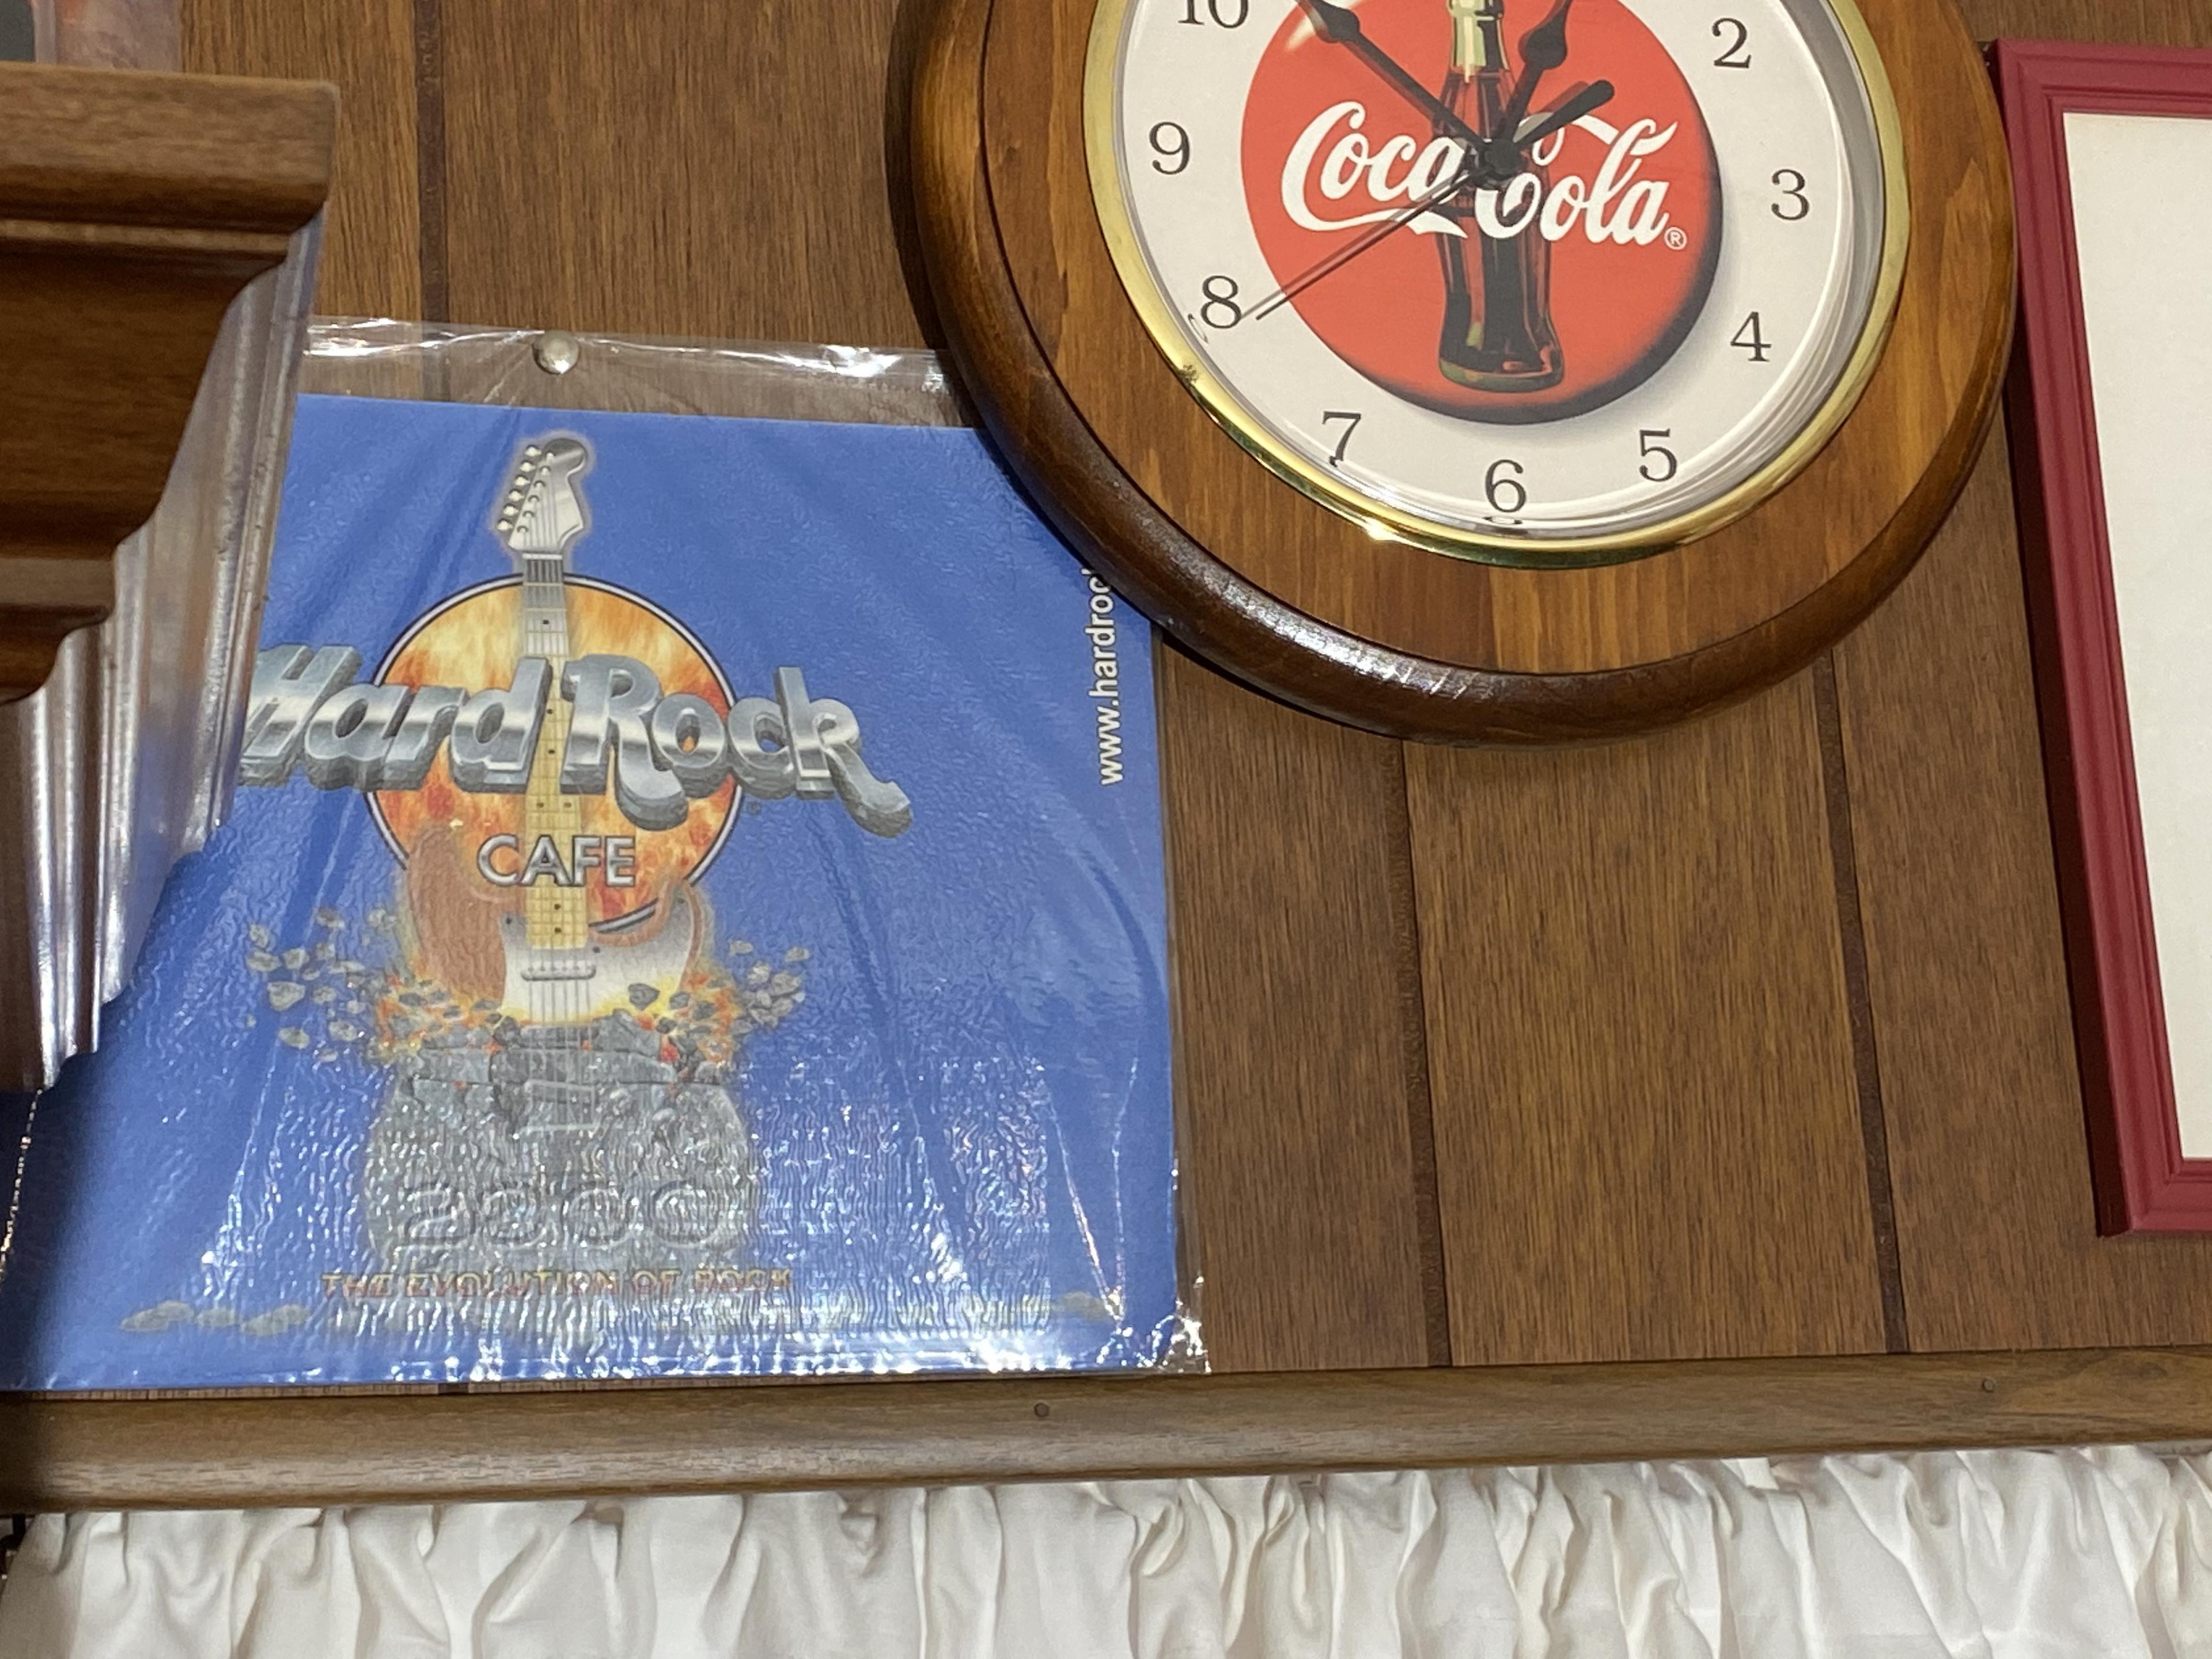 Hard Rock and Coke items including clock